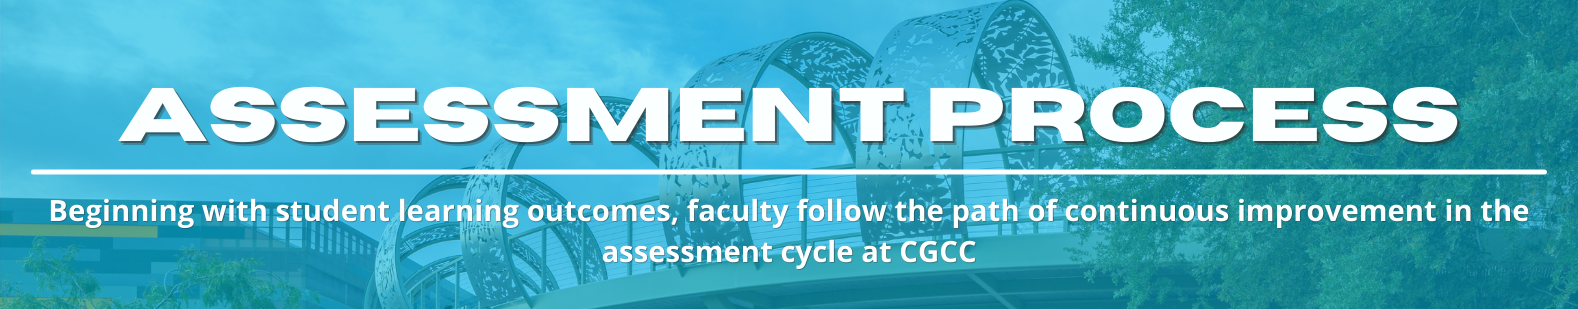 Assessment Process: Beginning with student learning outcomes, faculty follow the path of continuous improvement in the assessment cycle at CGCC